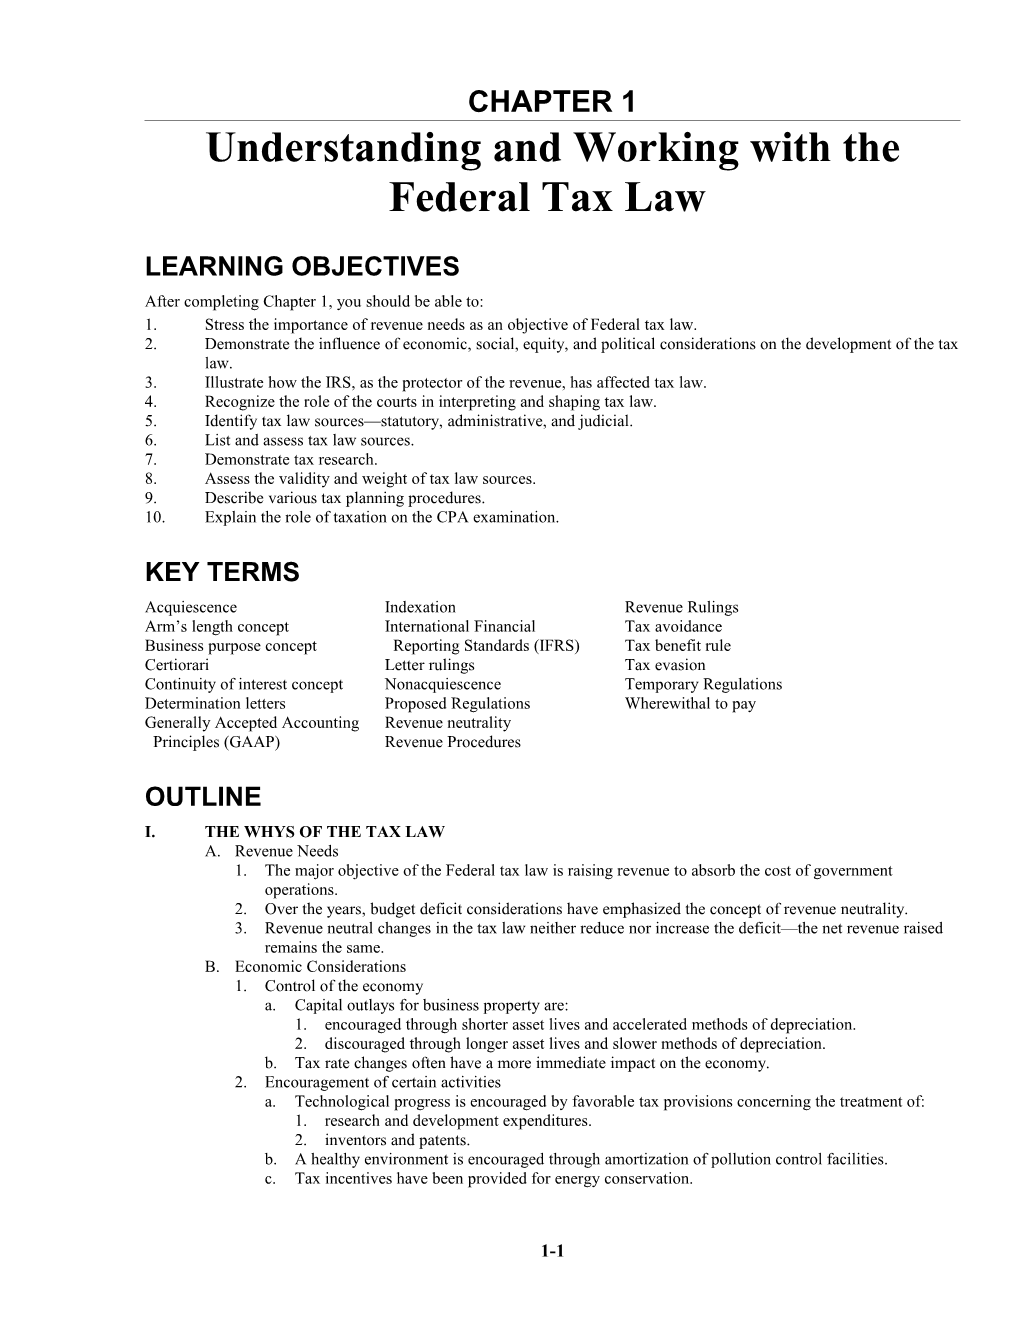 Understanding and Working with the Federal Tax Law